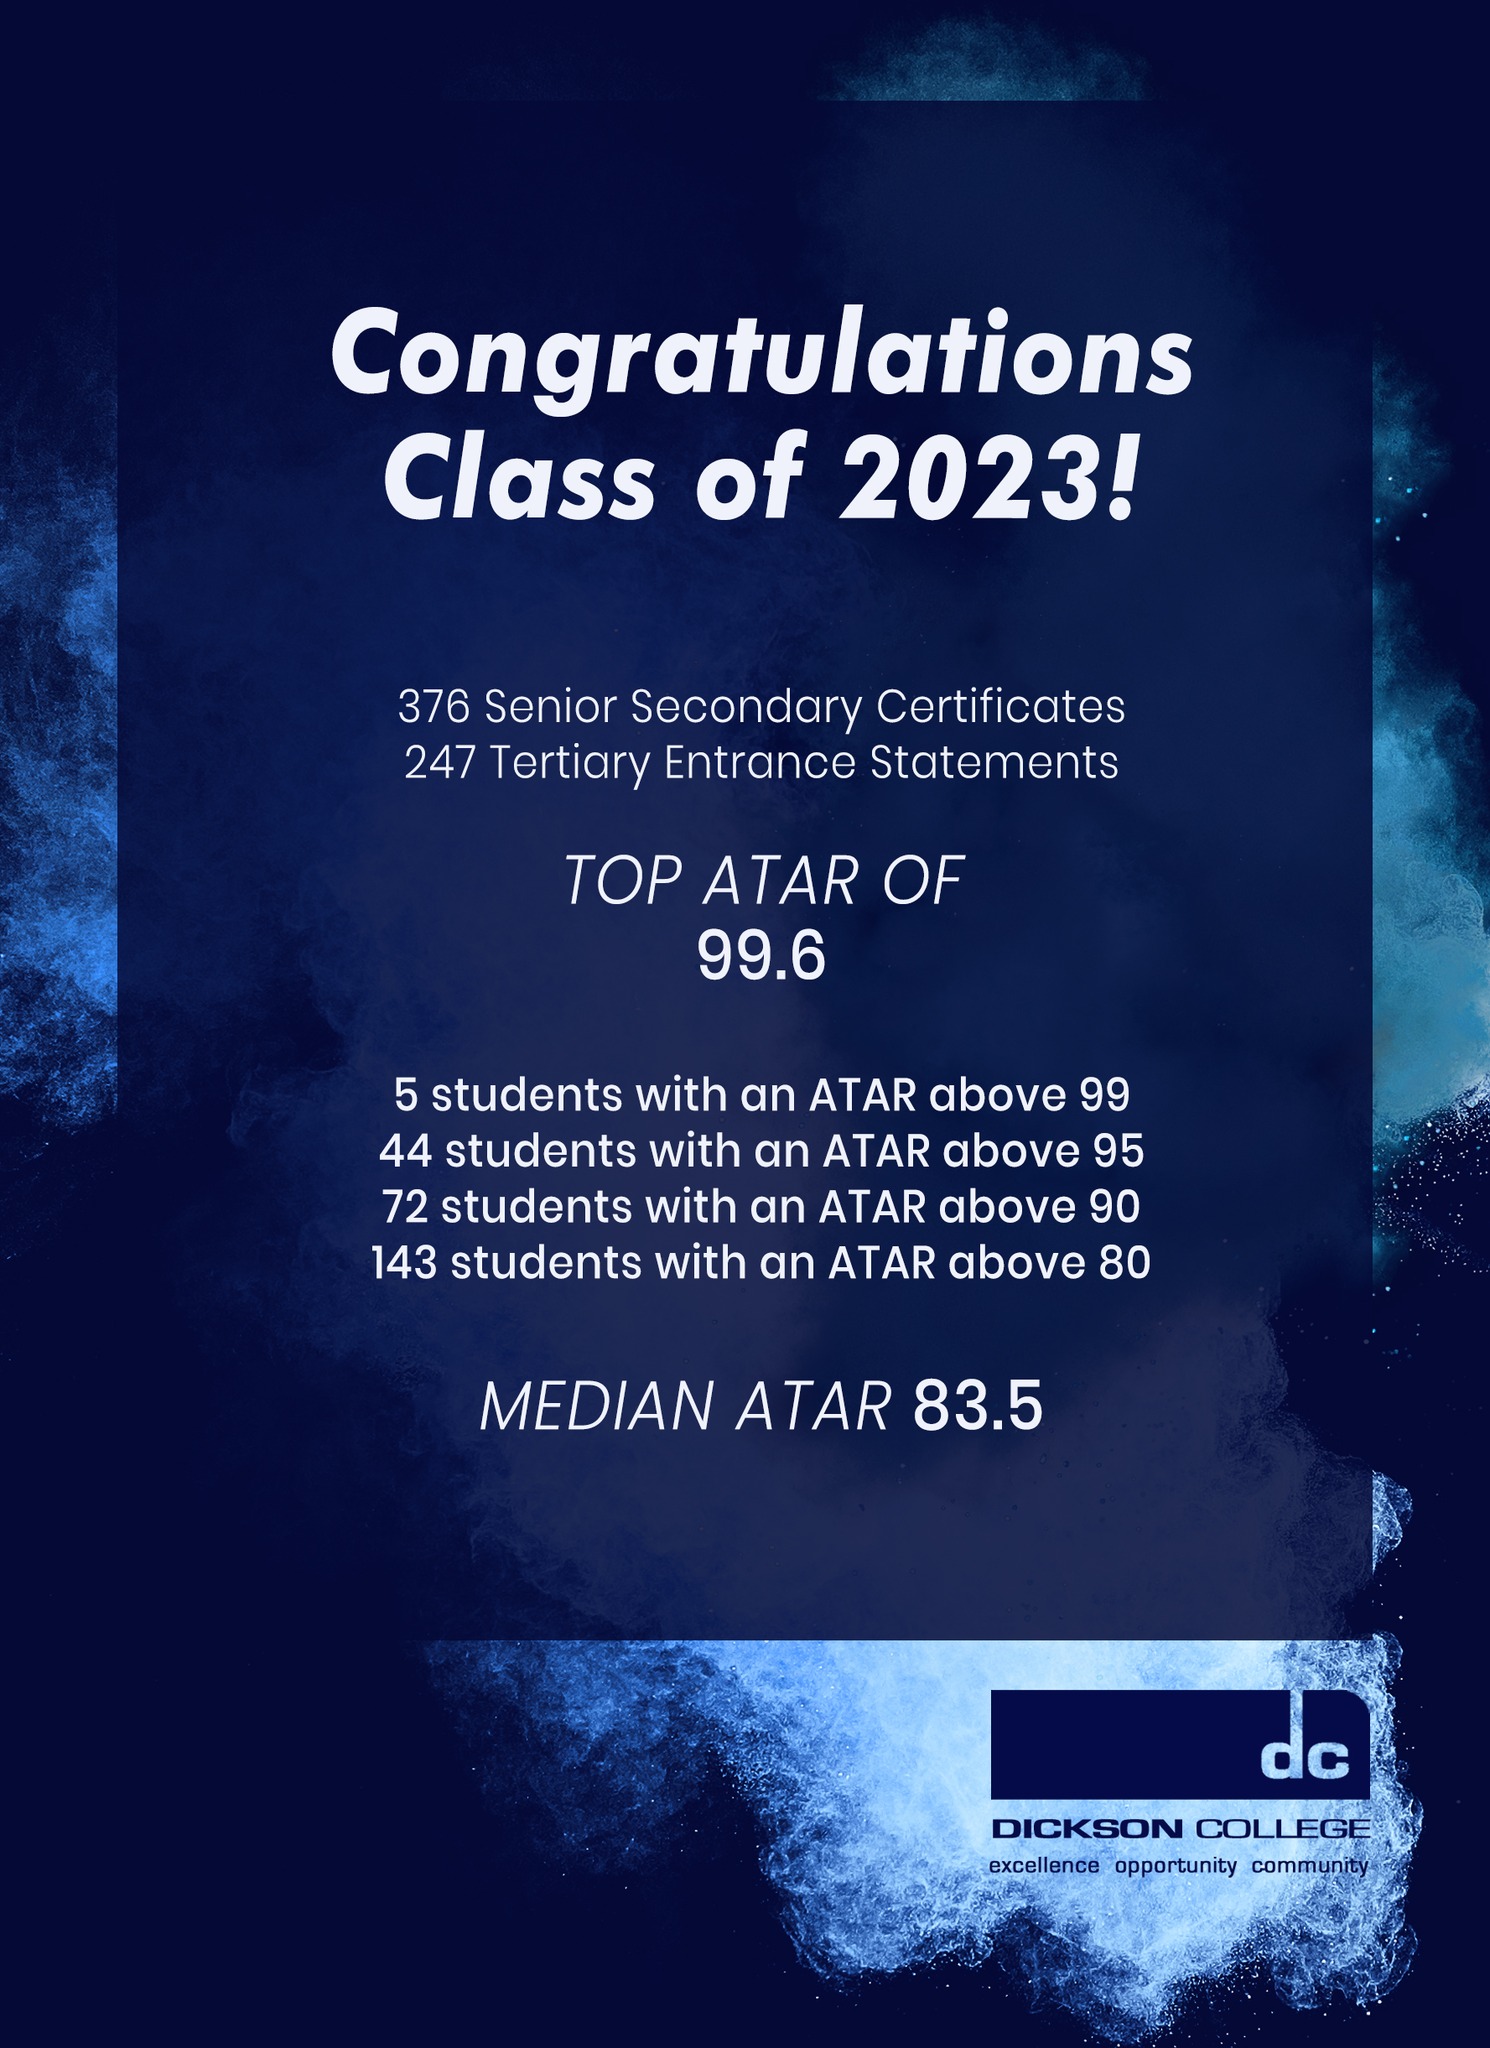 Well done graduating students of 2023!